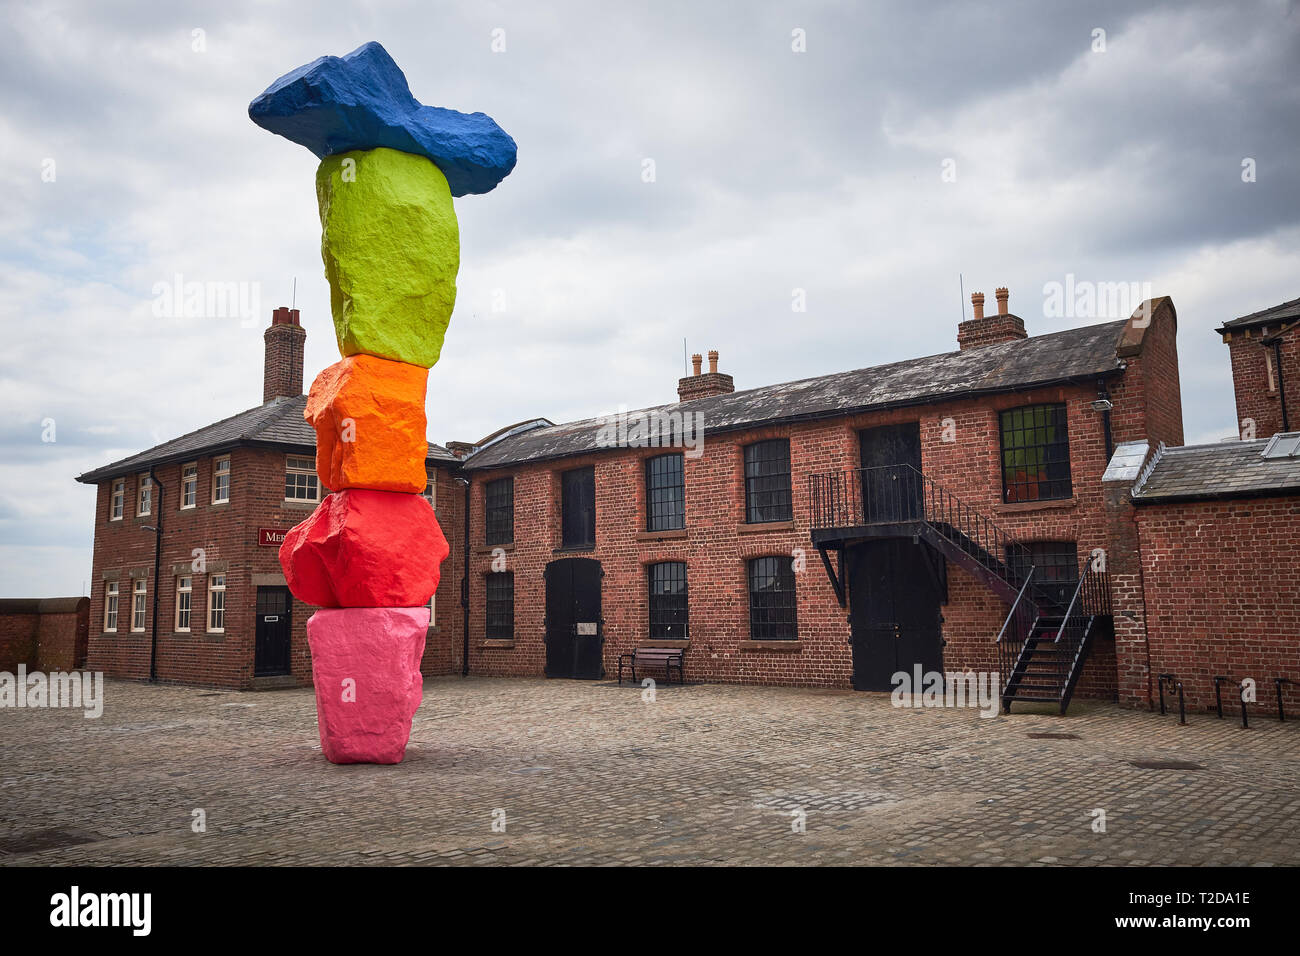 Outside the Tate Liverpool art gallery surrounded by buildings of the Royal Albert dock stands a sculpture by Ugo Rondinone named Liverpool Mountain Stock Photo